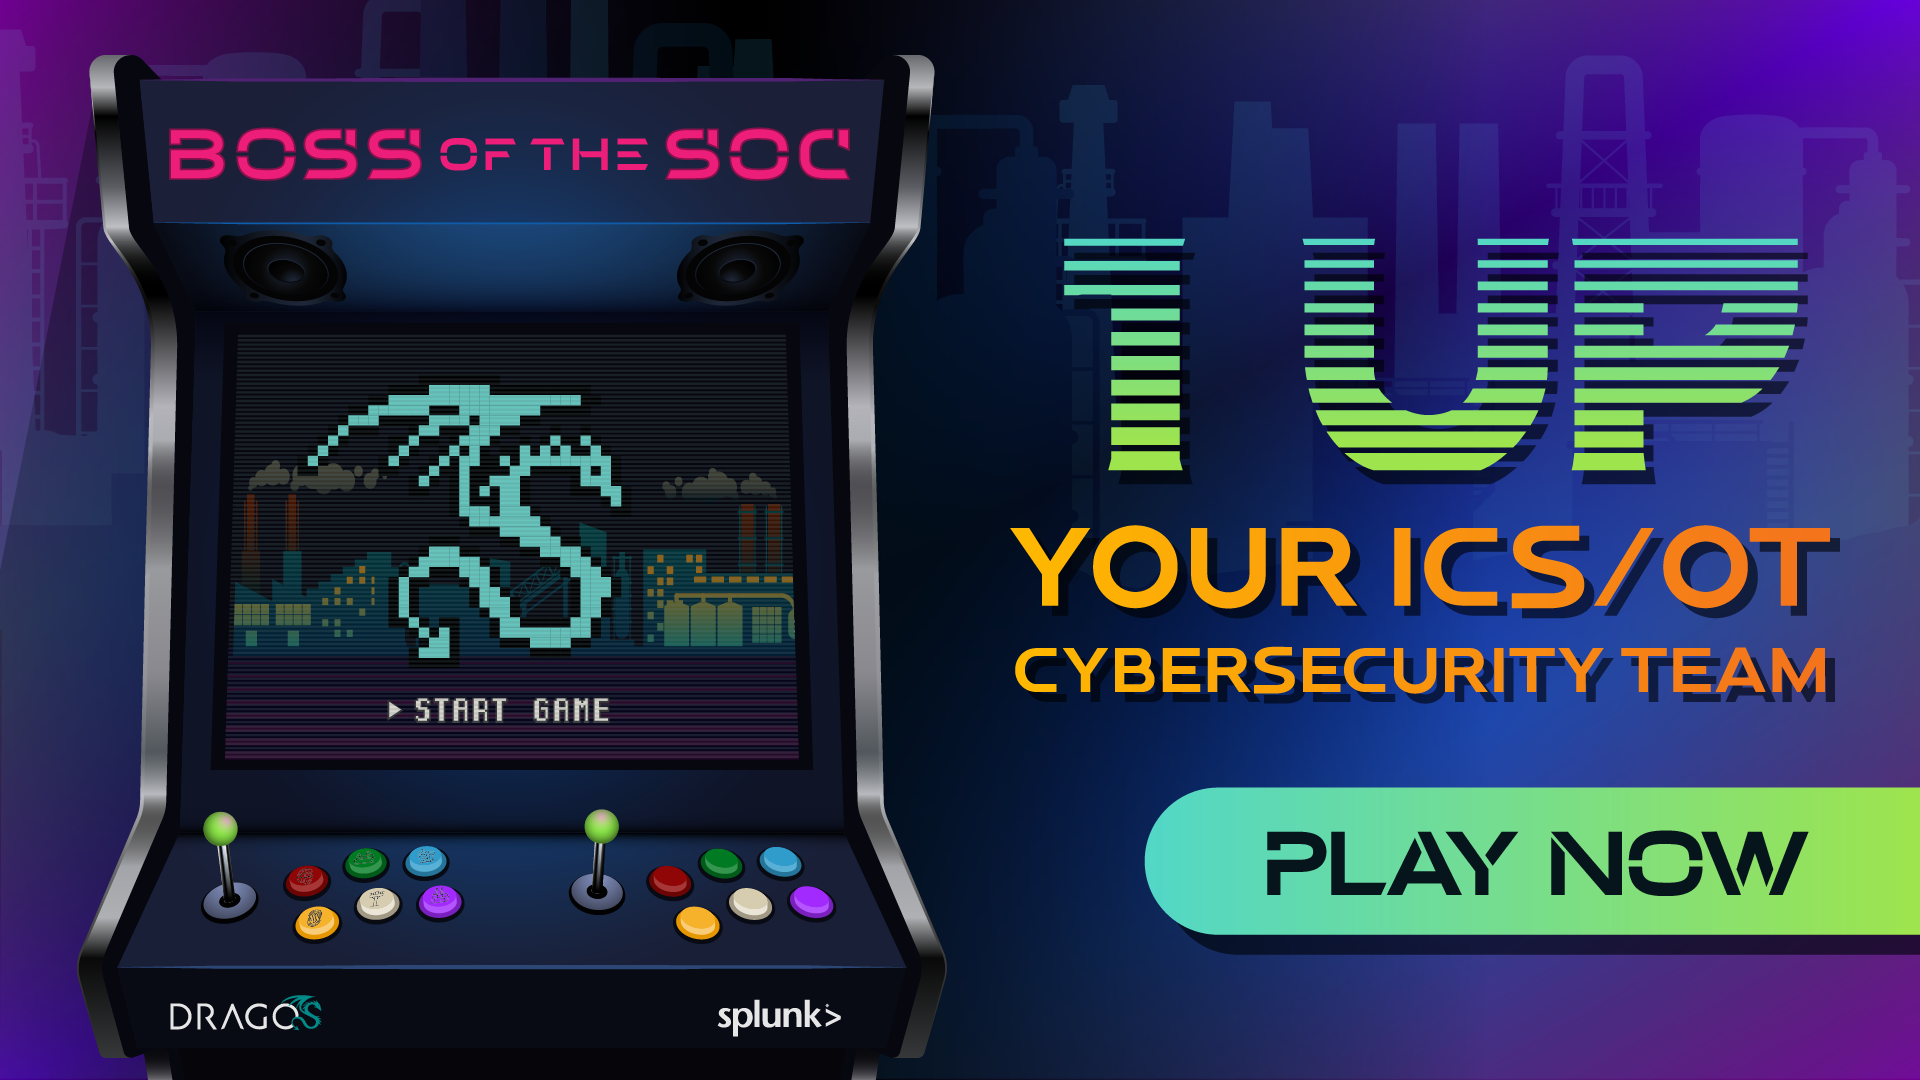 A graphic depicting Boss of SOCS game, a collaboration between SPLUNK and Dragos